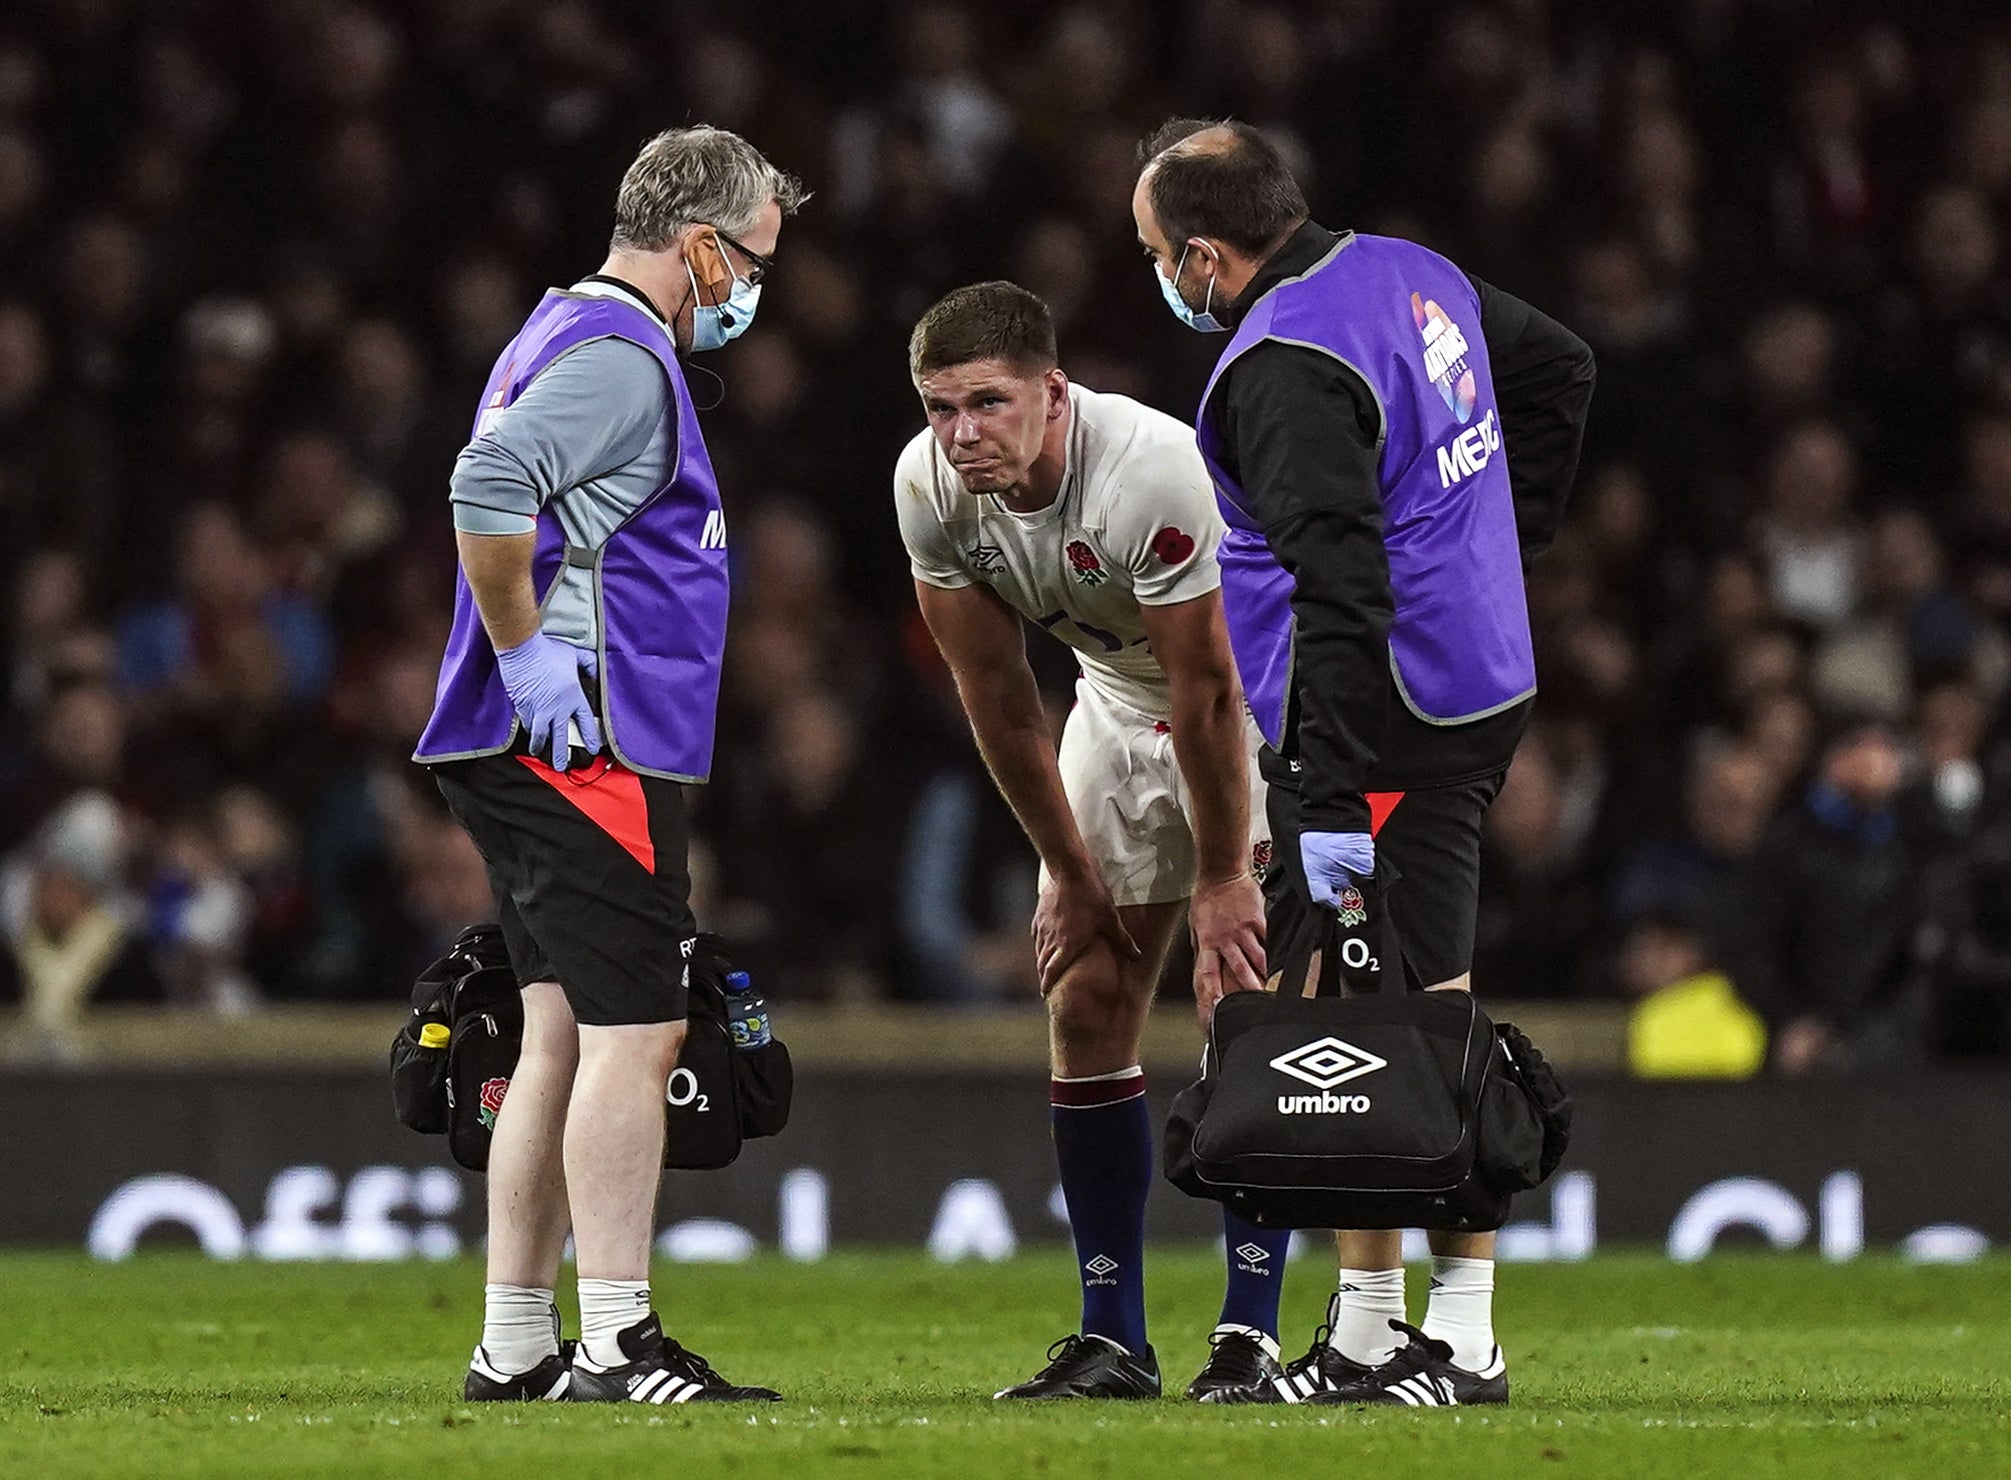 Owen Farrell suffered the first of two ankle injuries against Australia in the autumn (Mike Egerton/PA)